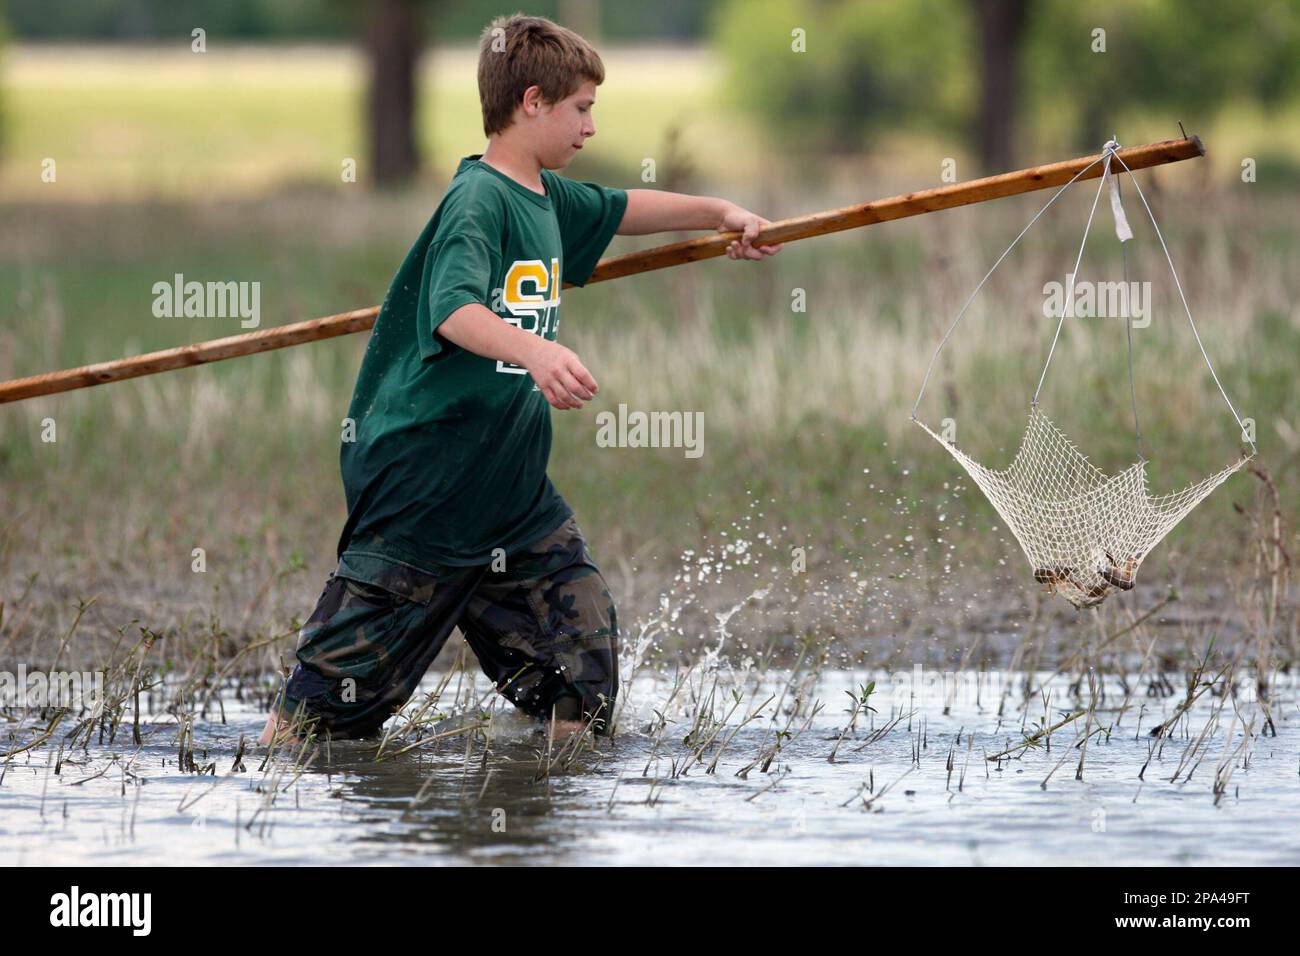 Toby Williams, 13, of Independence, La. catches crawfish Monday, May 19, 2008 in the Bonnet Carre Spillway near Norco, Louisiana. The Spillway was opened for four weeks to lower the level of the Mississippi River as it passes New Orleans. With the Spillway now closed crawfish can be found in abundance. (AP Photo/Tim Mueller) Stock Photo